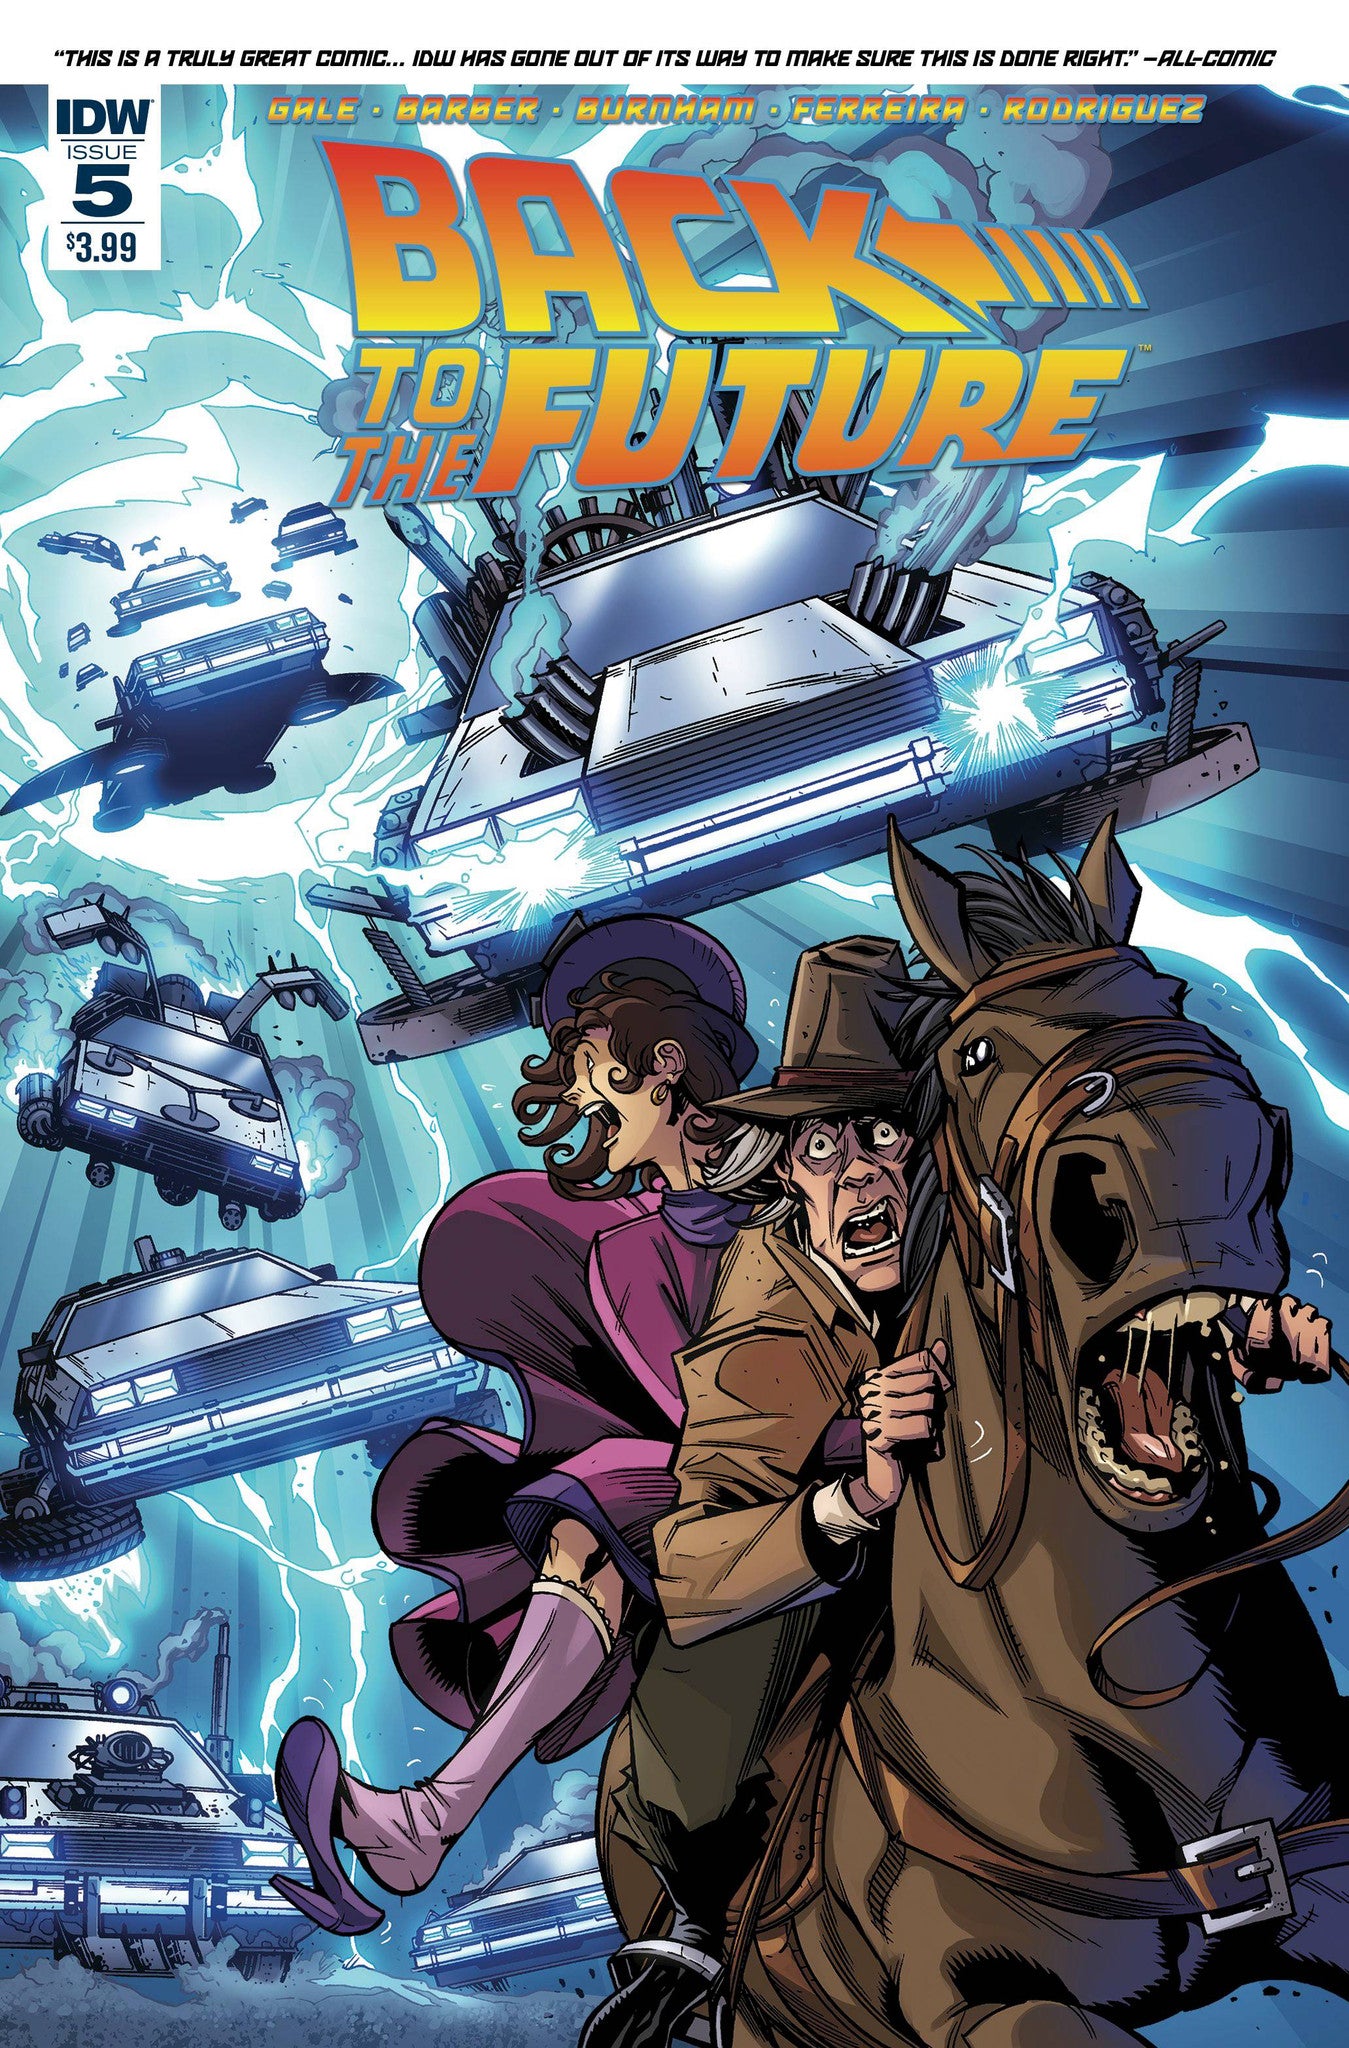 BACK TO THE FUTURE #5 (OF 5)